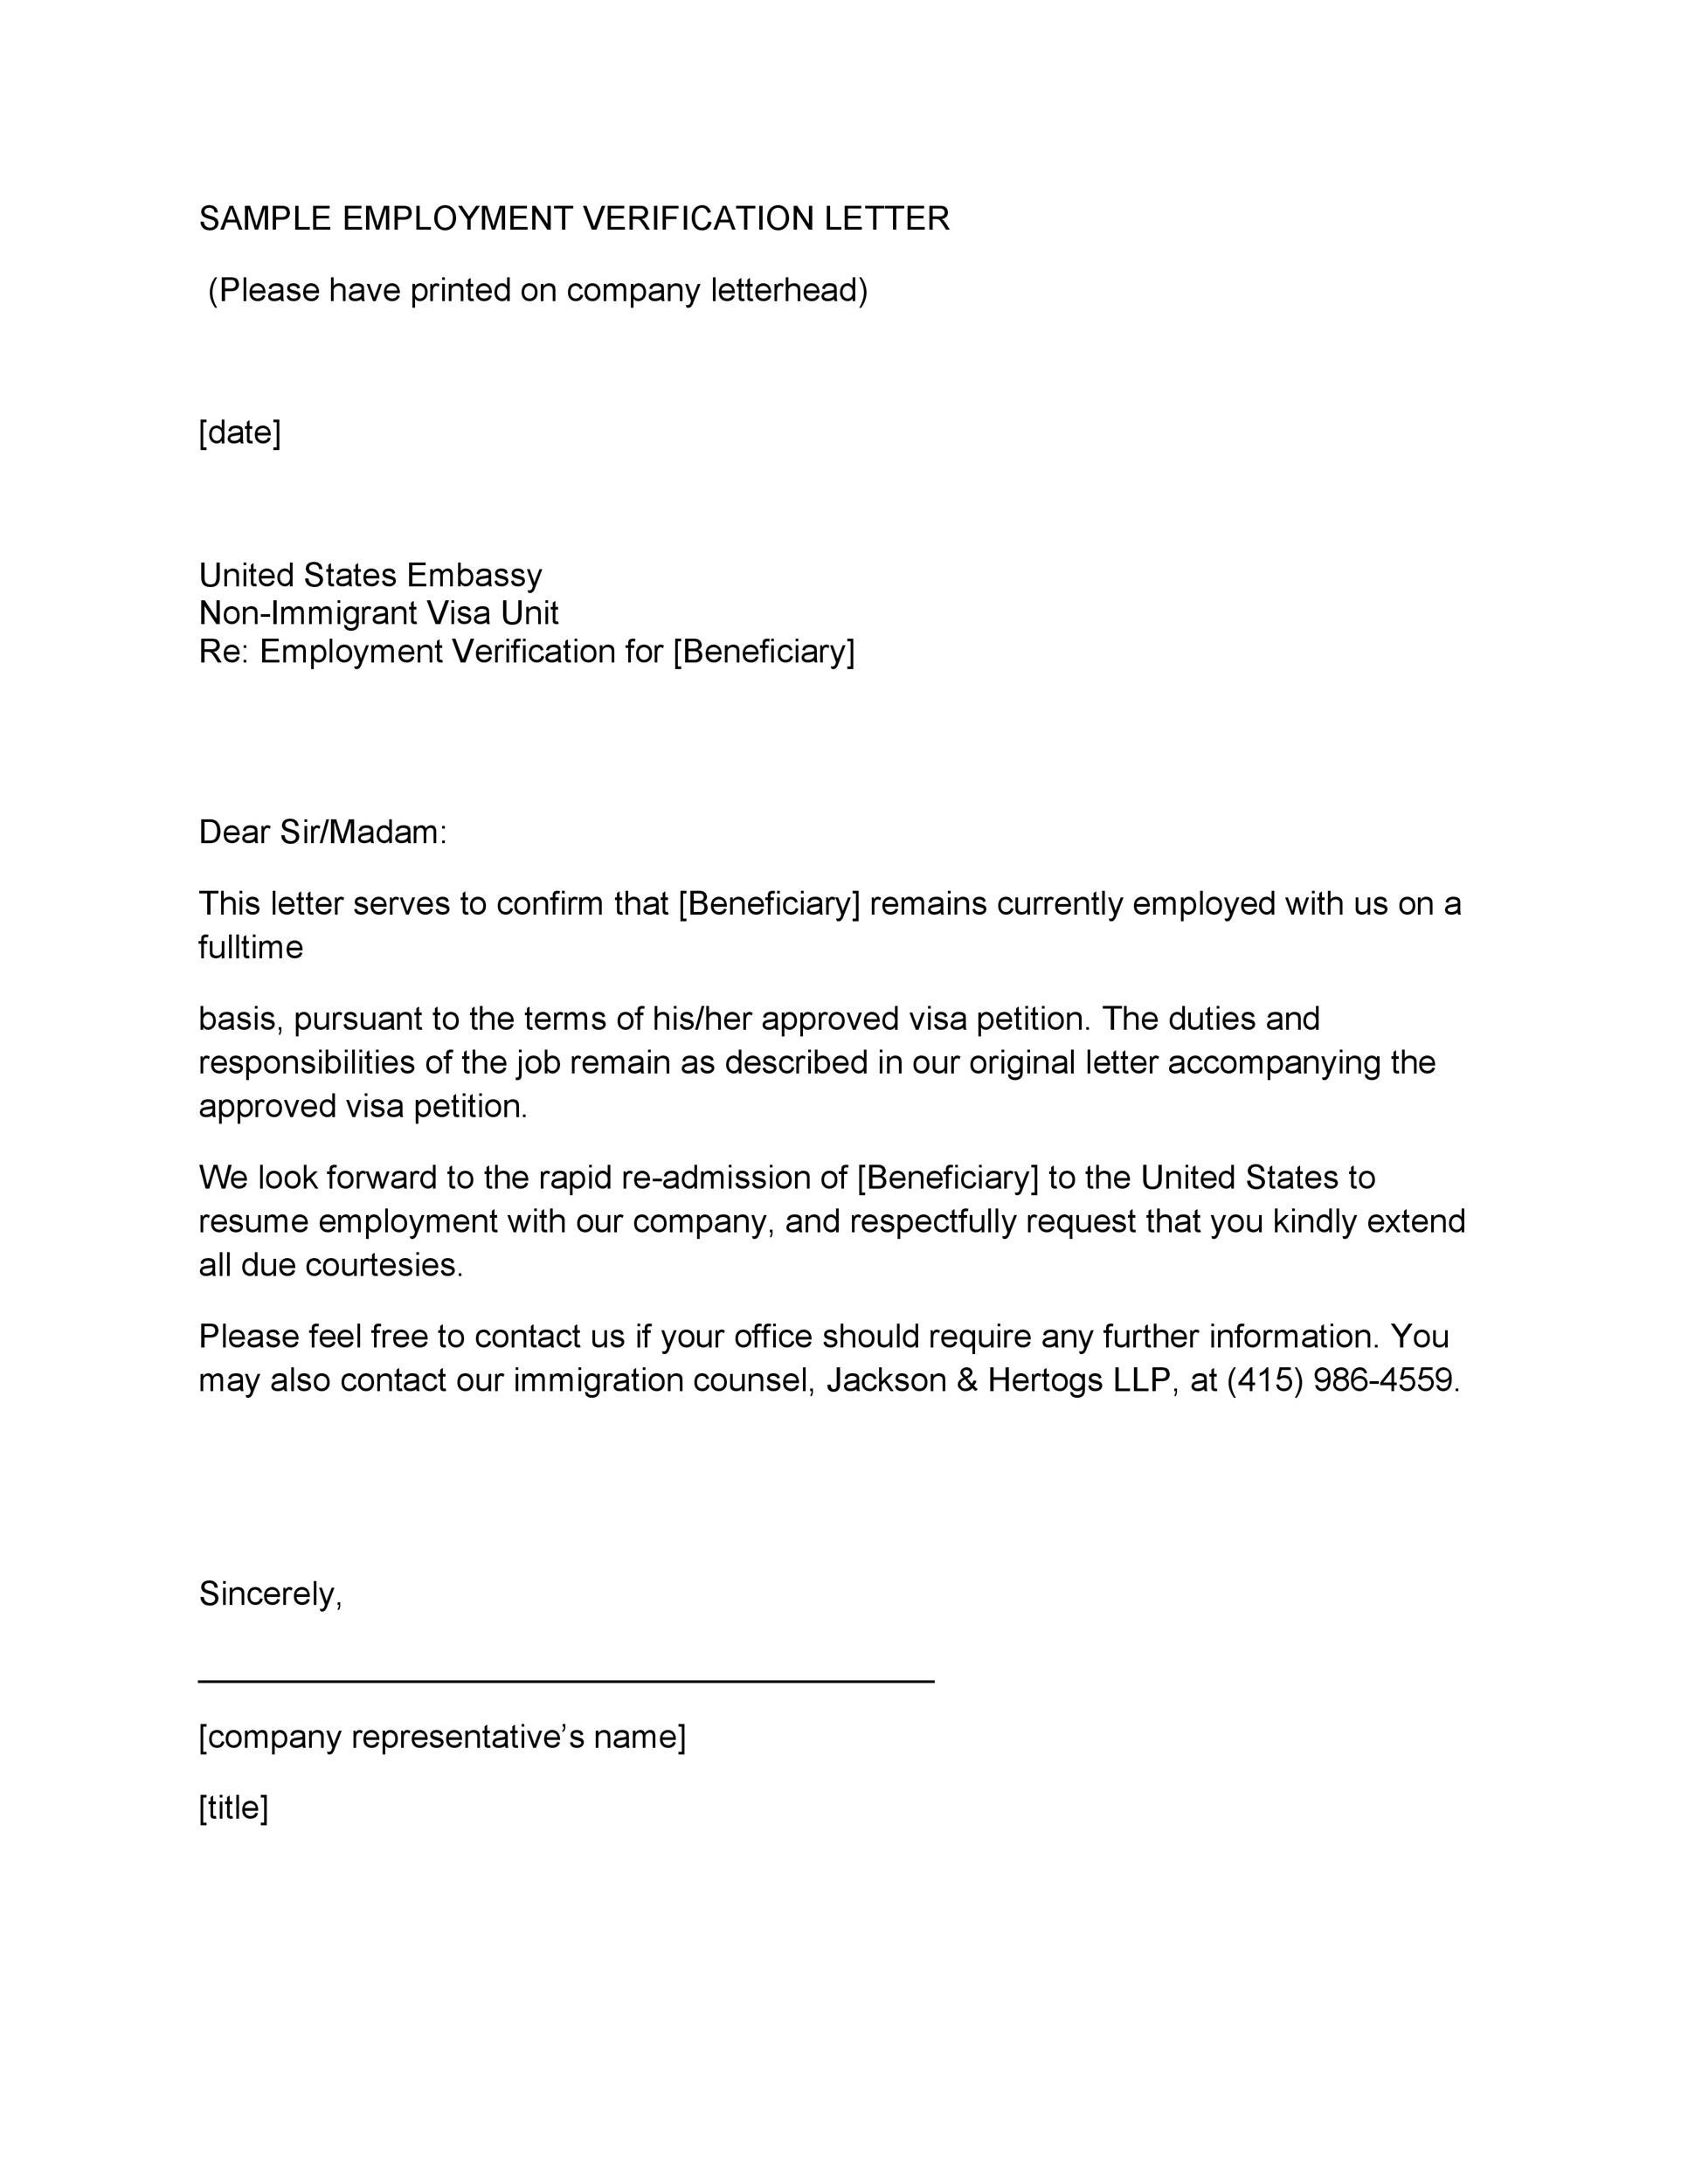 A Letter Of Employment from templatelab.com